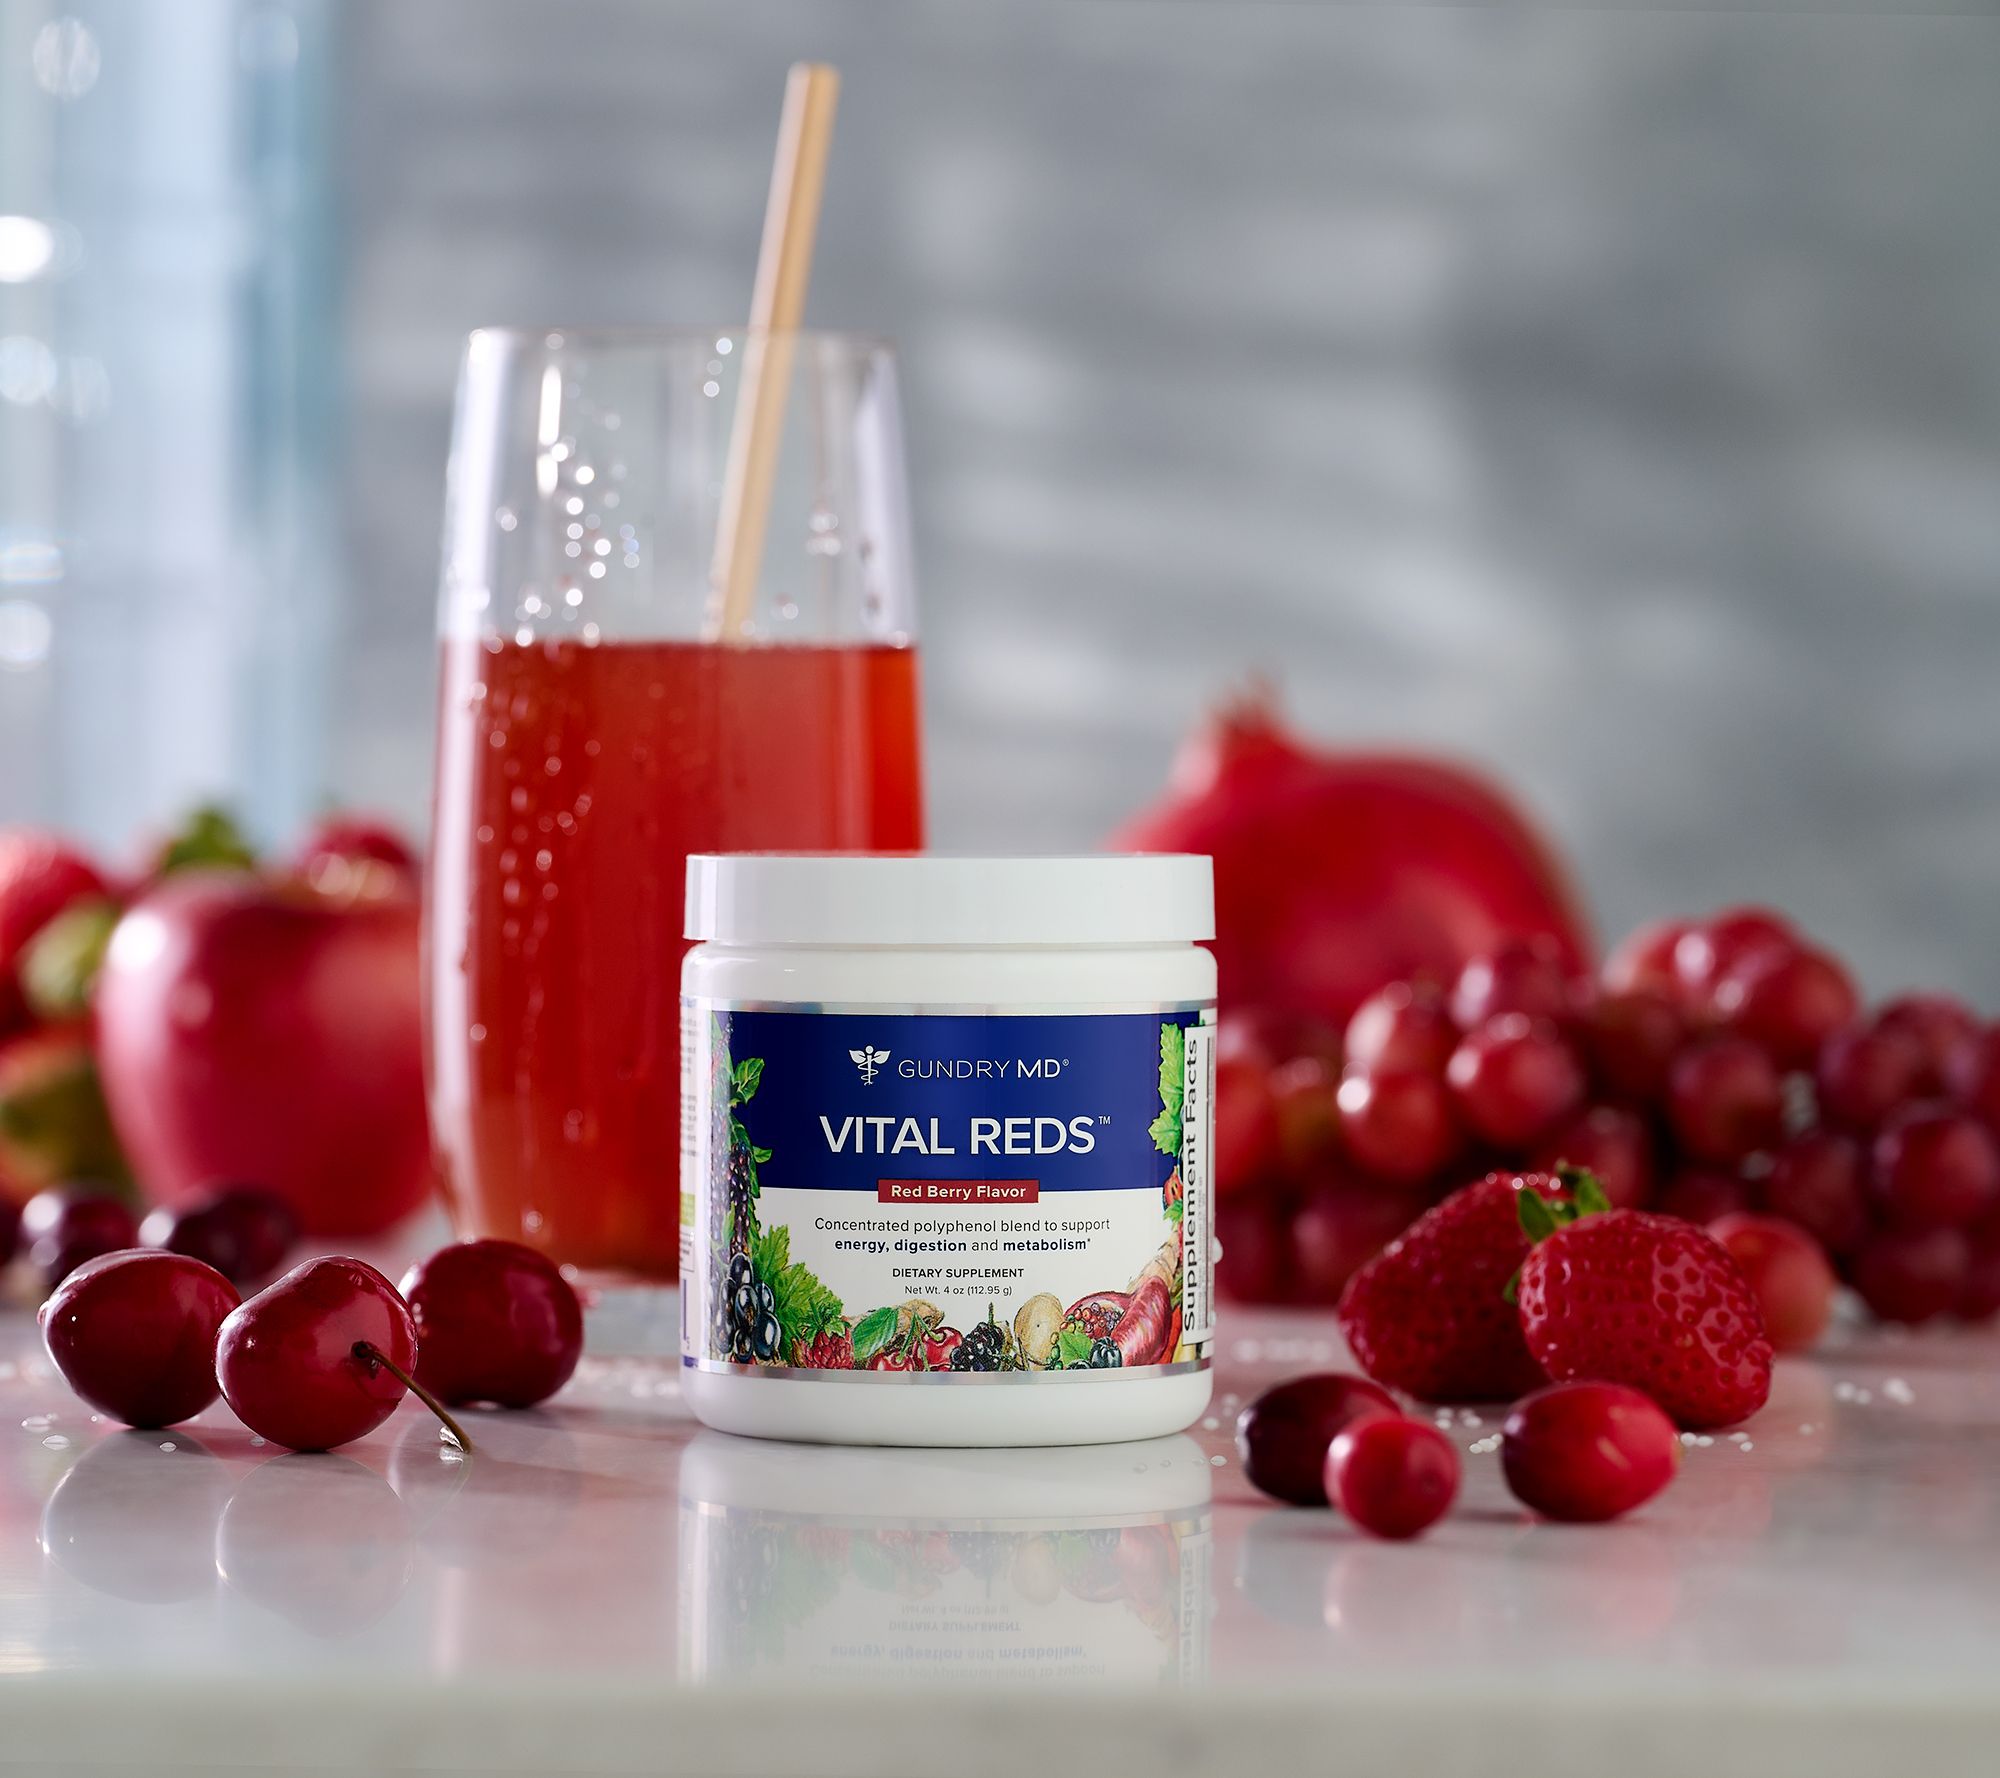 MD Vital Reds Nutrient 30 Day Supply - QVC.com